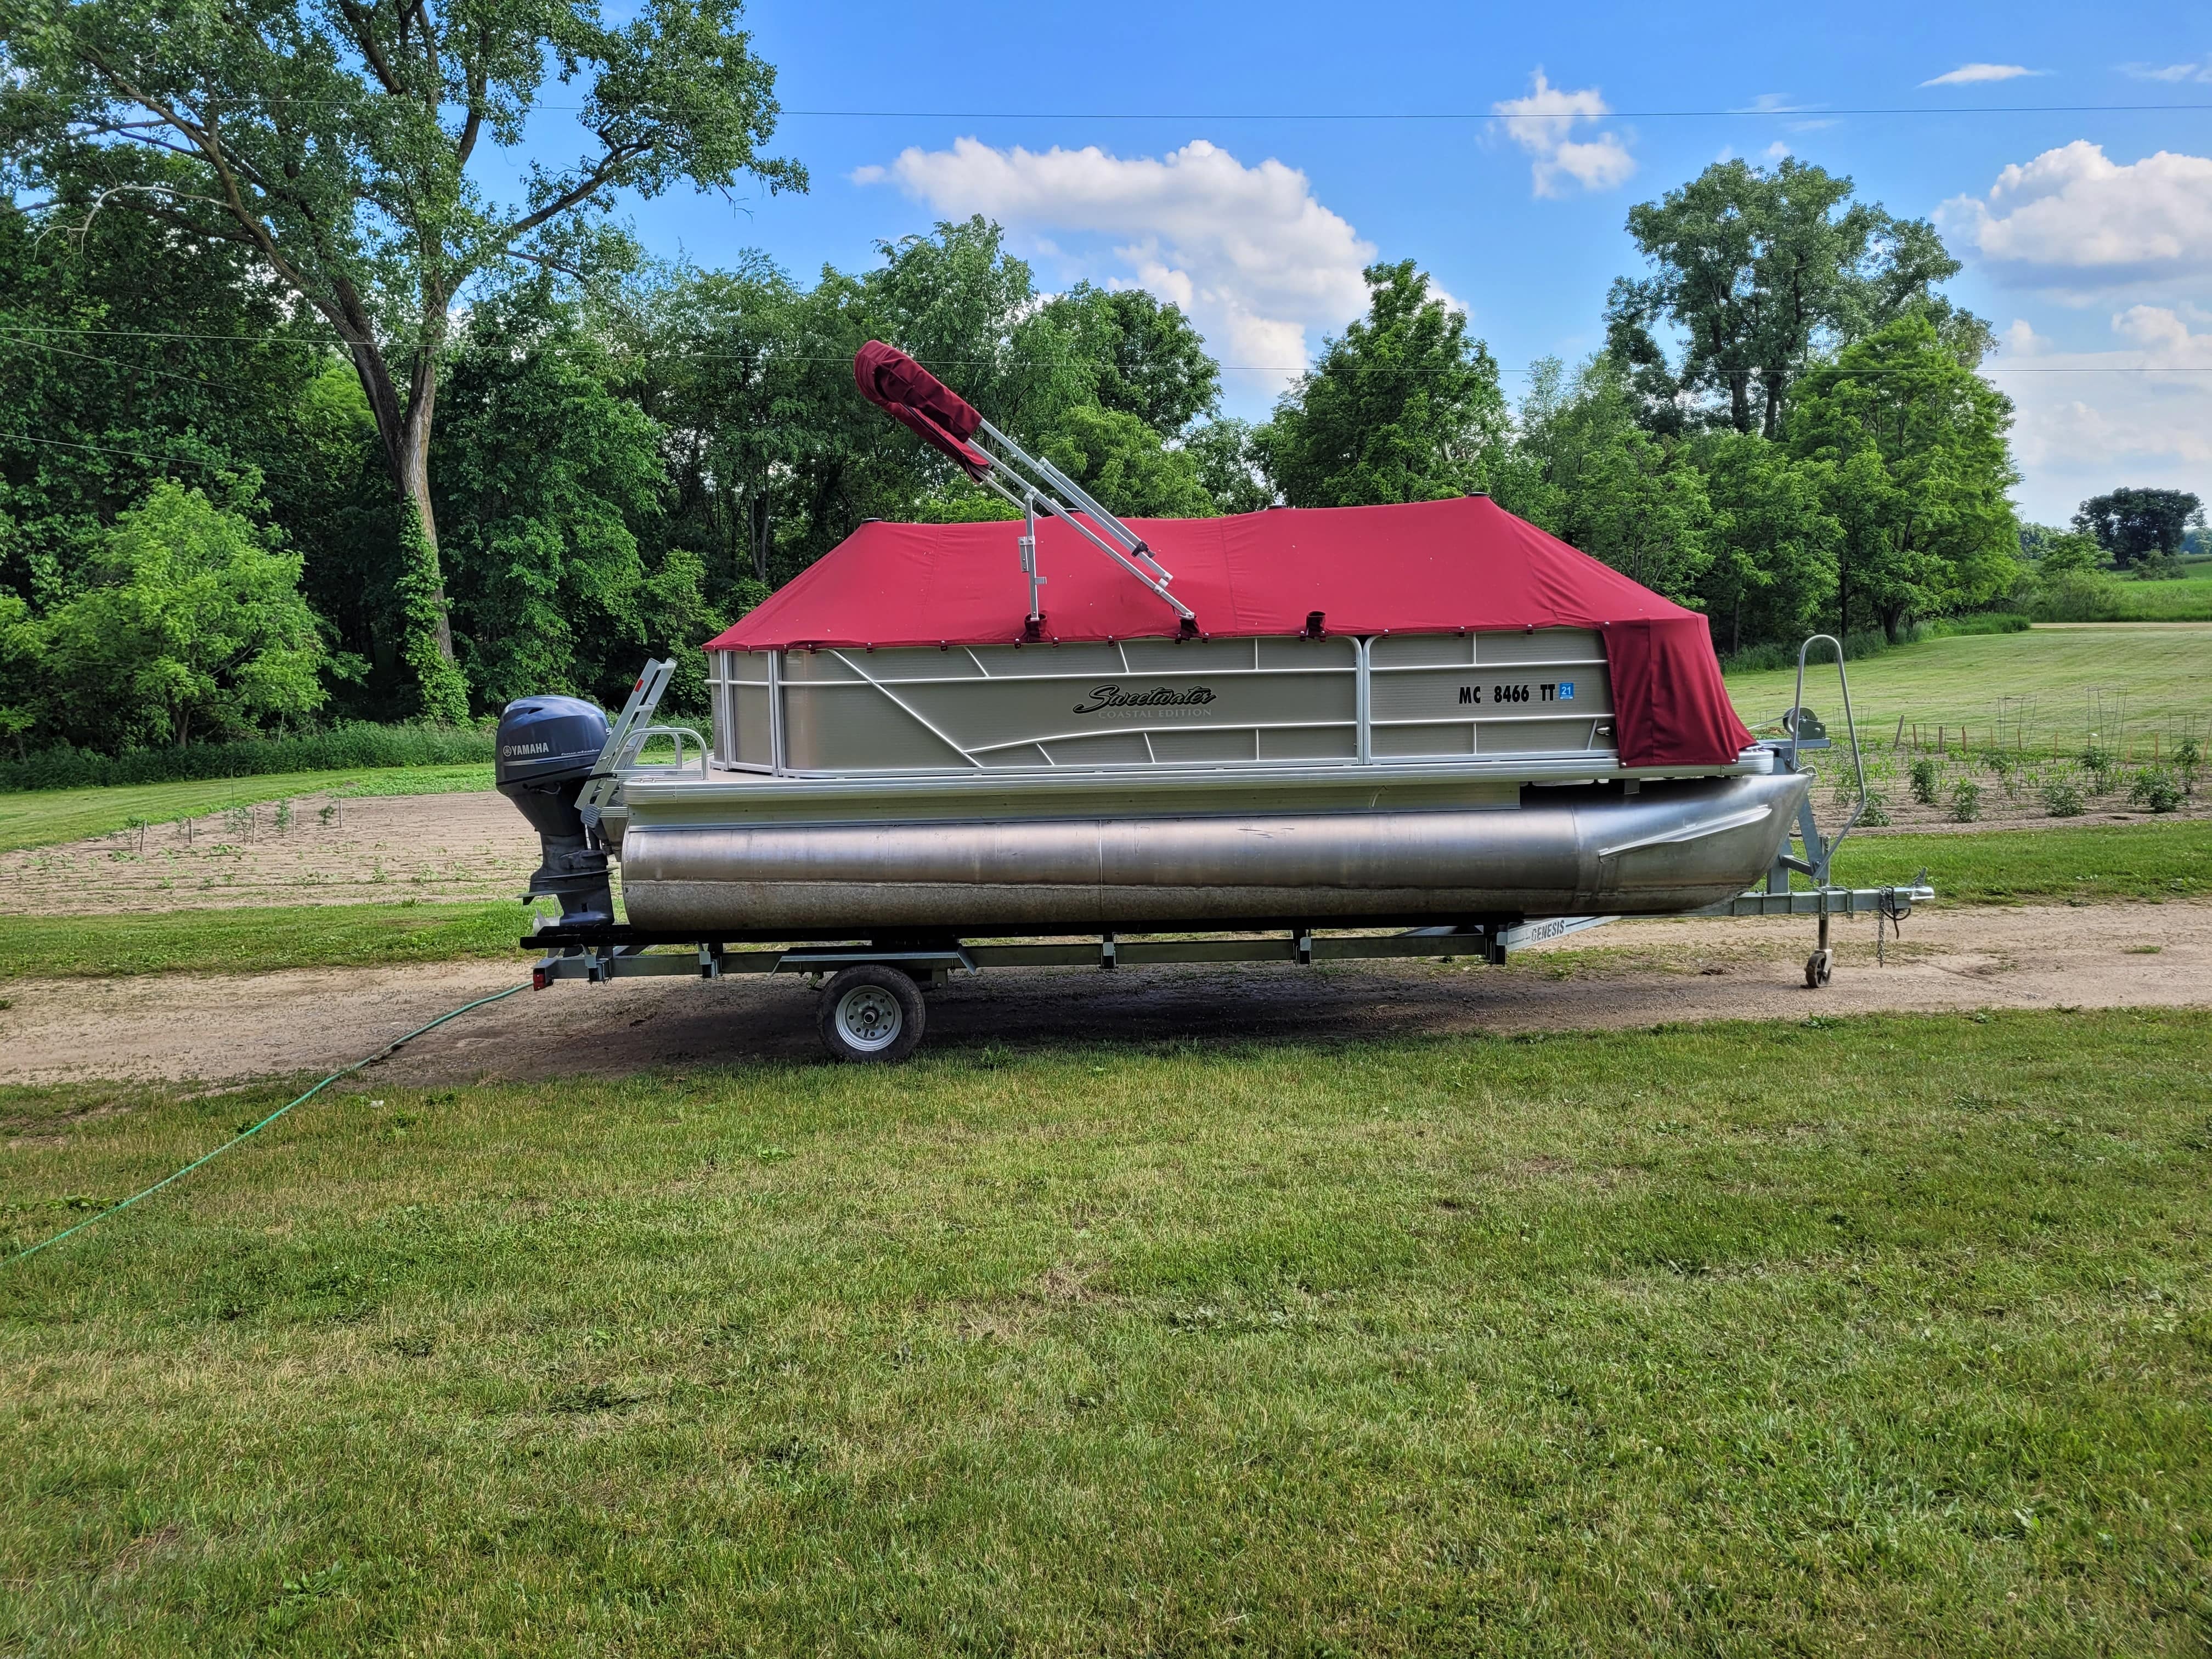 A boat with a custom sewed cover 